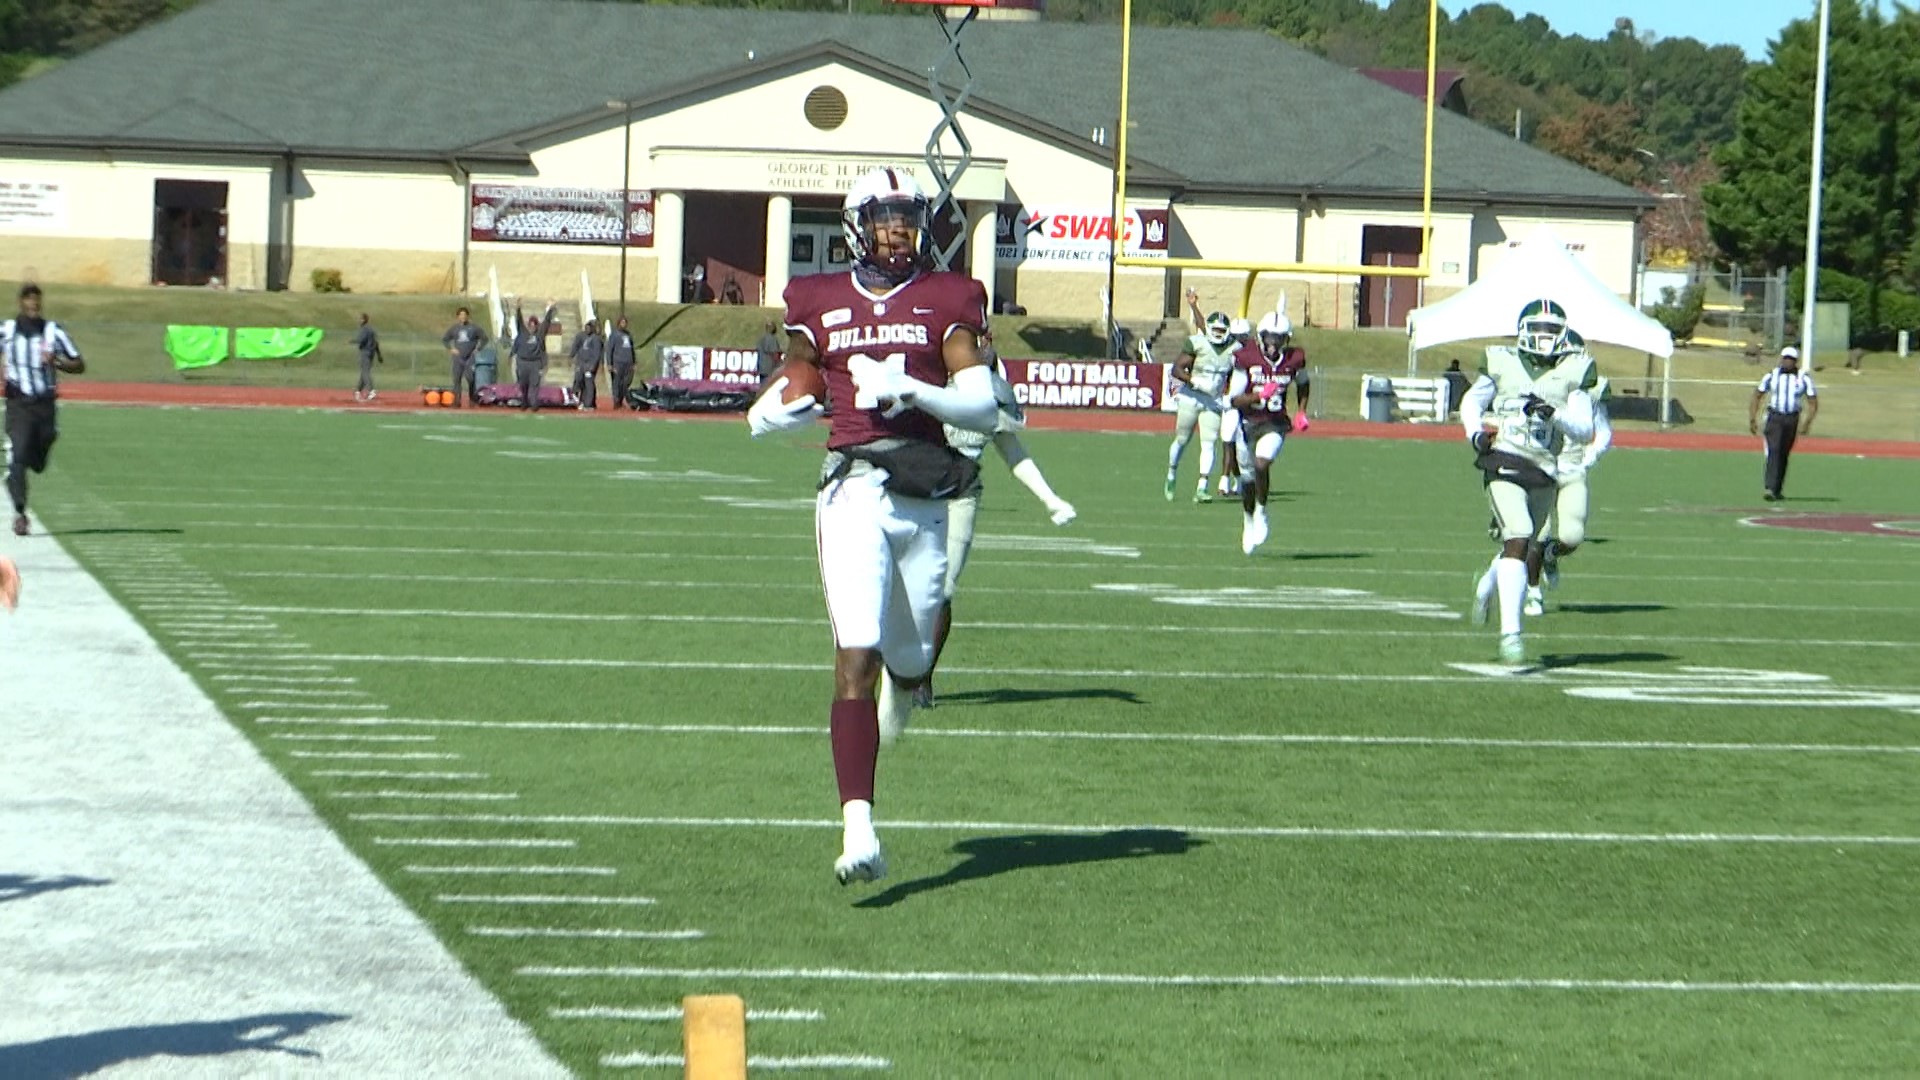 Alabama A&M rolled up 577 yards of offense and senior wideout Dee Anderson (Dallas, Texas) tied for the national lead in receiving touchdowns in a 42-14 victory.